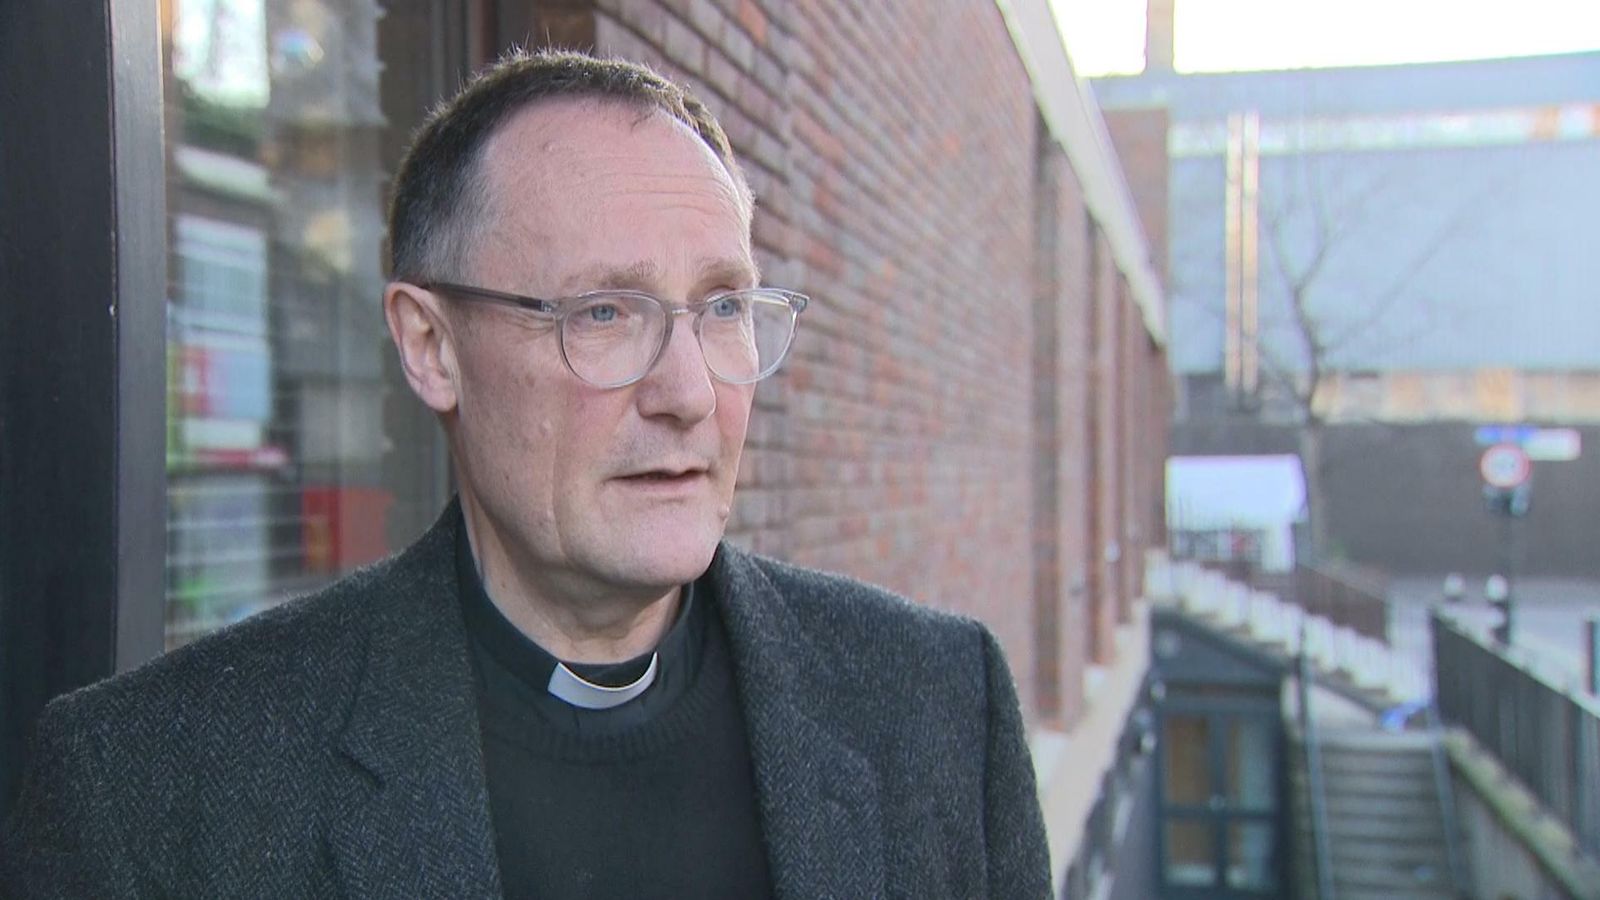 Euston shooting: Priest describes aftermath of 'drive-by' outside church following memorial service